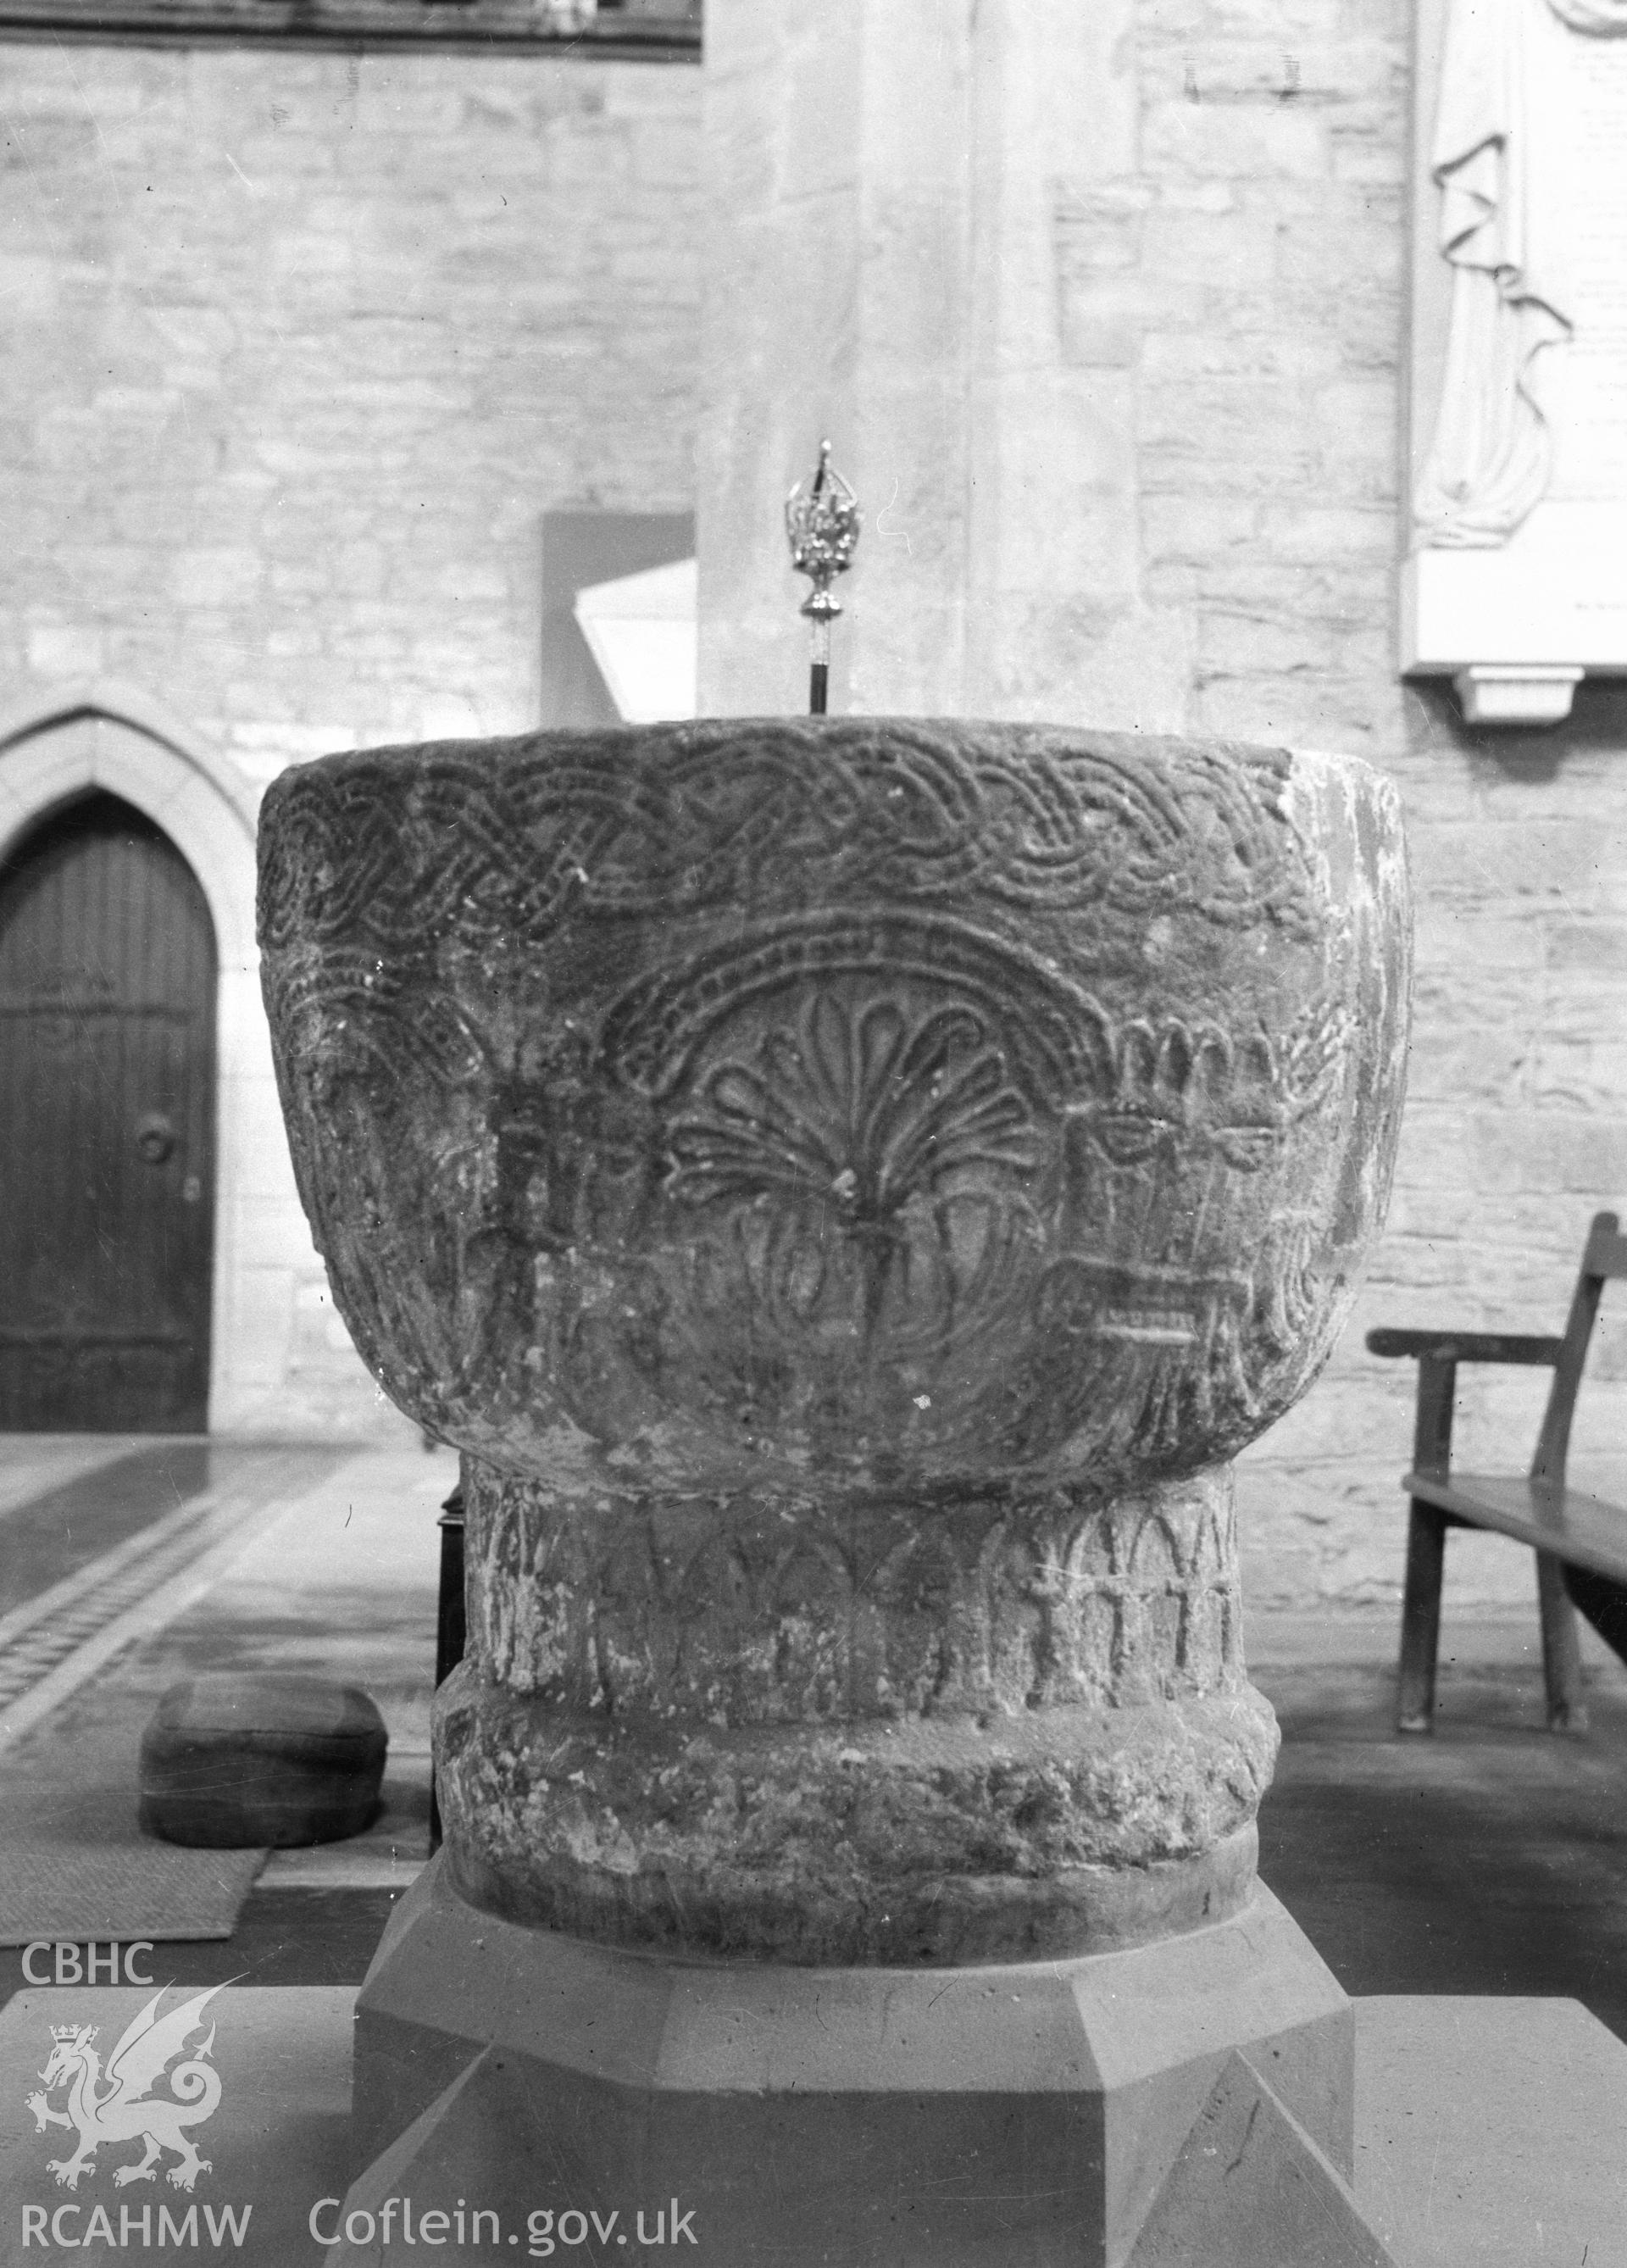 Digital copy of nitrate negative showing font at Brecon Cathedral. From the Cadw Monuments in Care Collection.